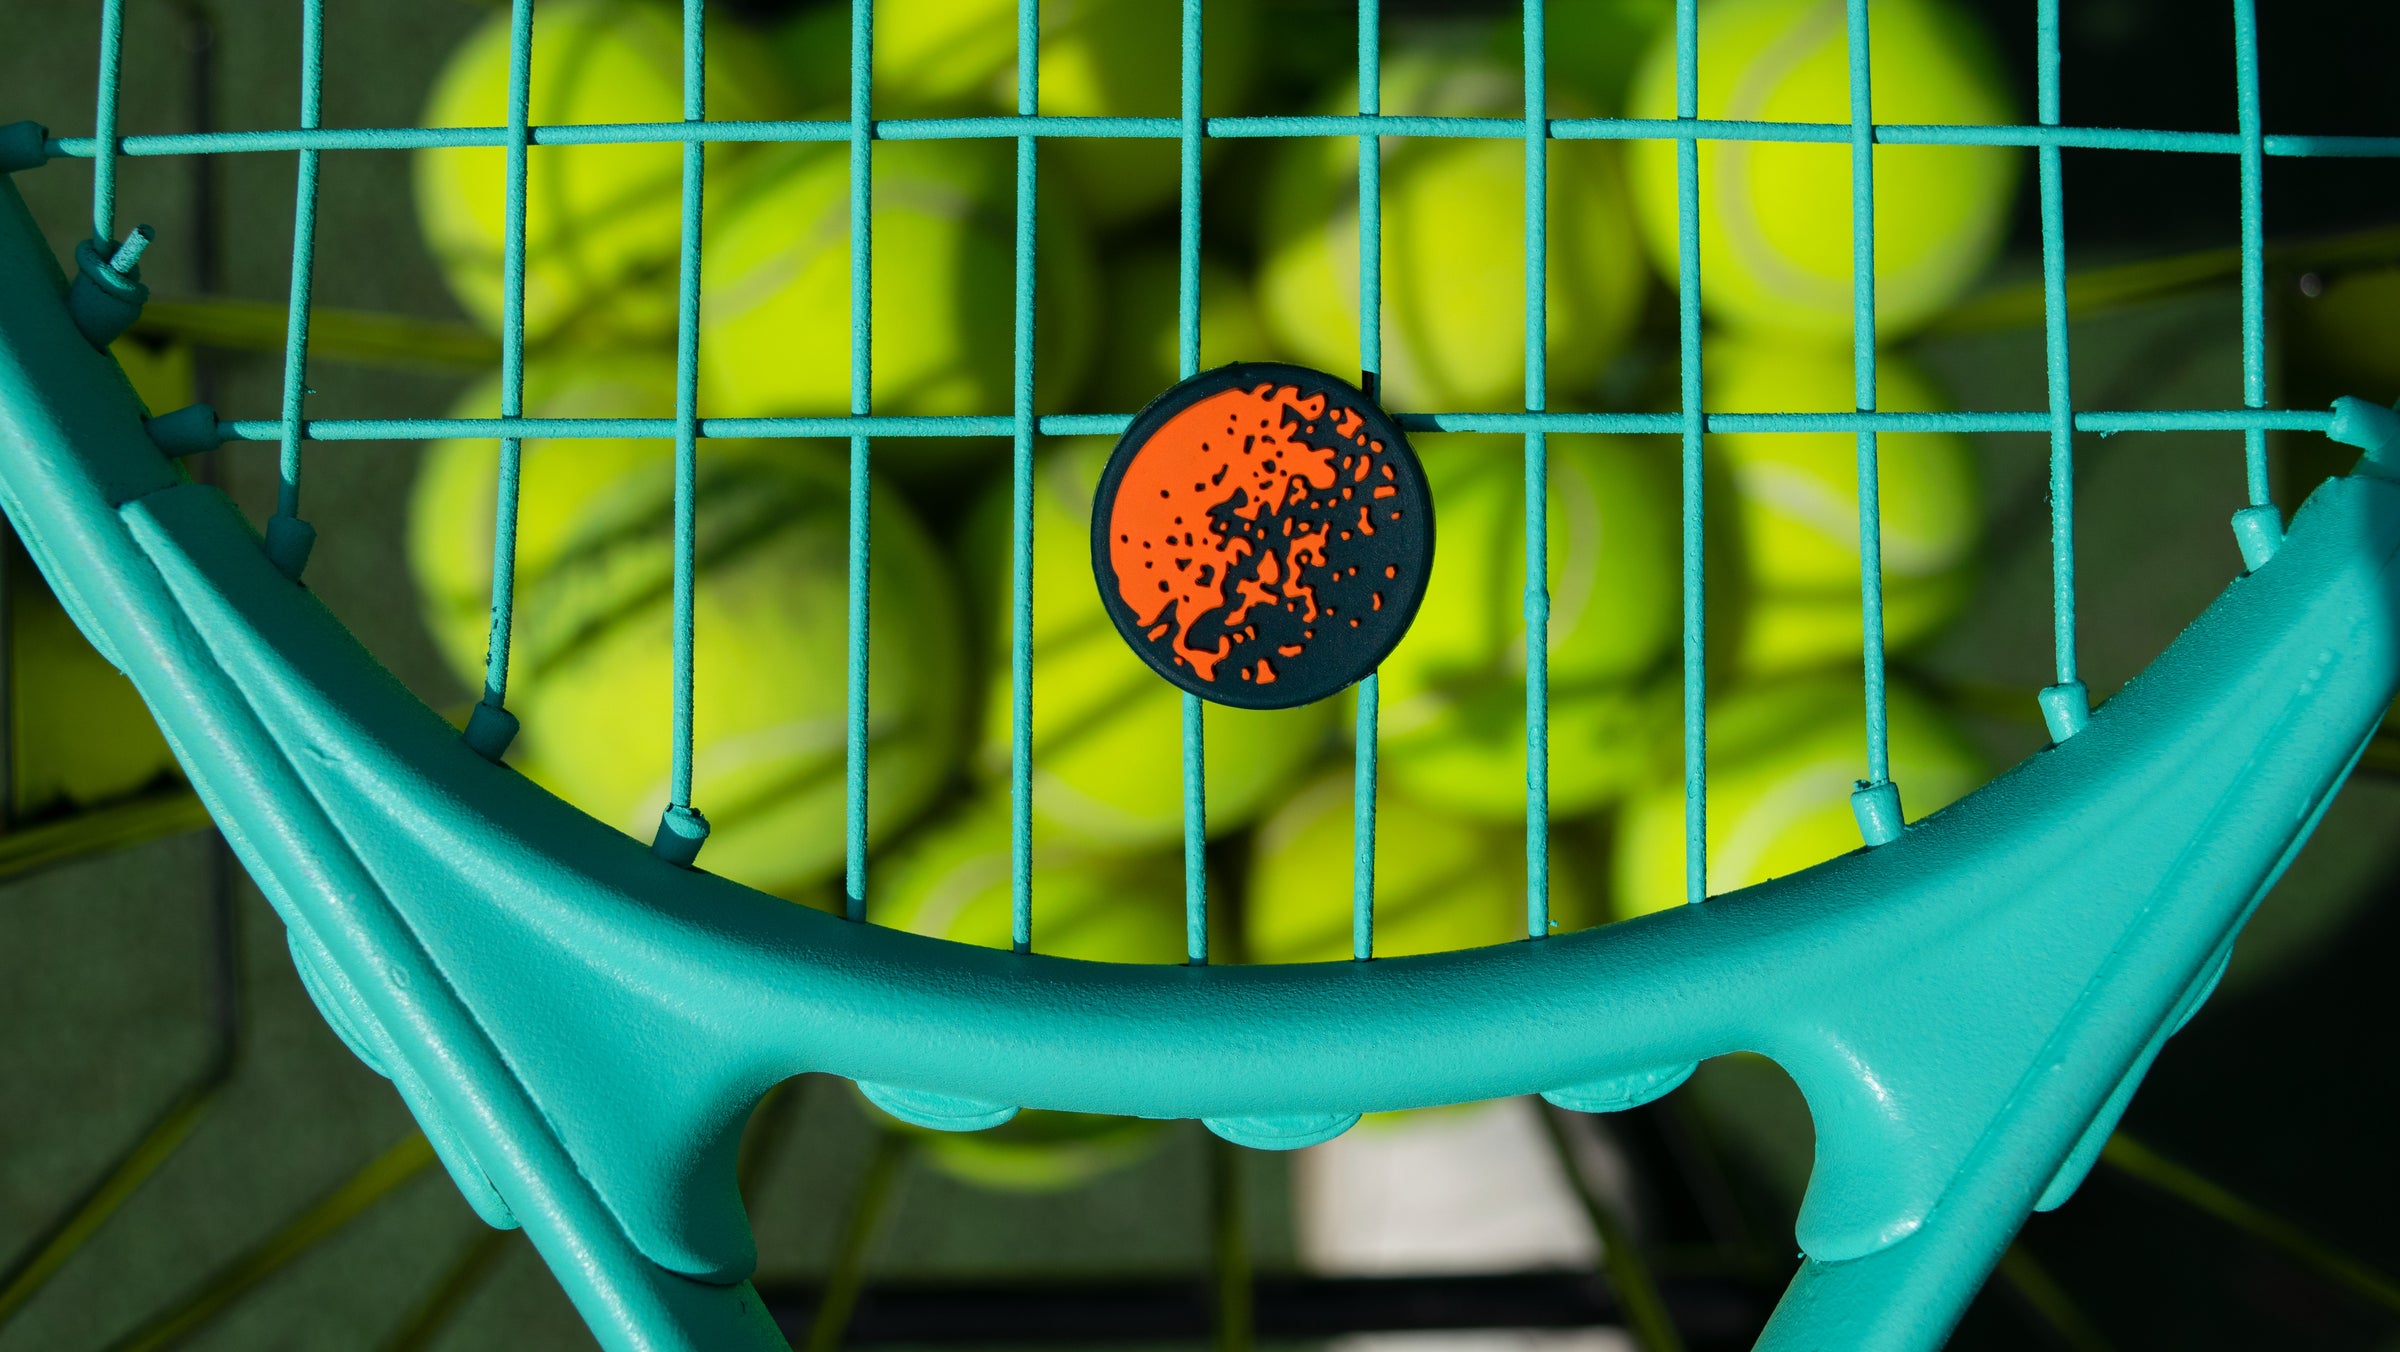 Put on an OVERGRIP like the Pros! Padel Grip! 